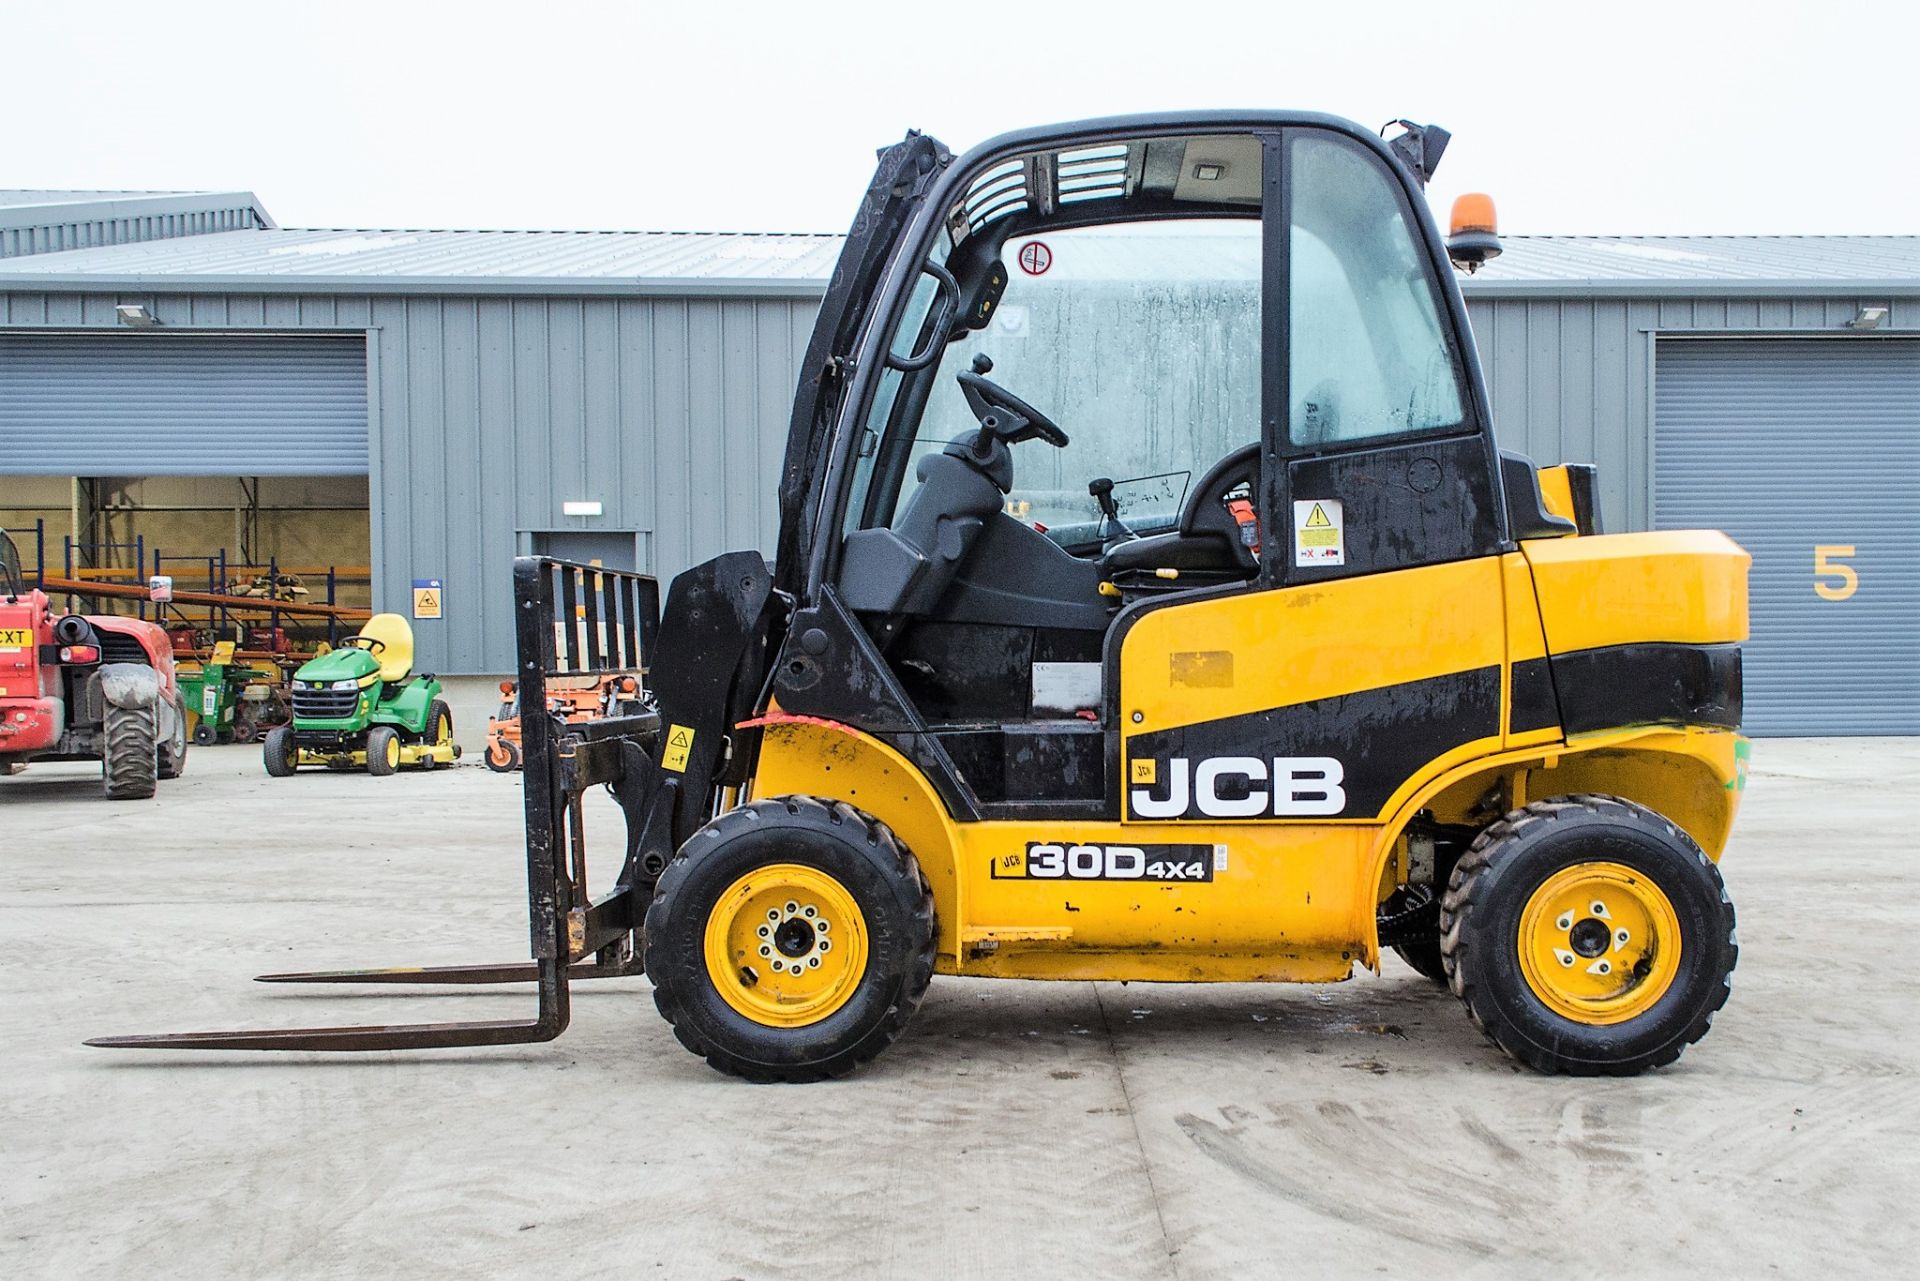 JCB Teletruk 30D 4x4 telescopic fork lift truck Year: 2013 S/N: 1541935 Recorded Hours: 1127 A623434 - Image 7 of 24